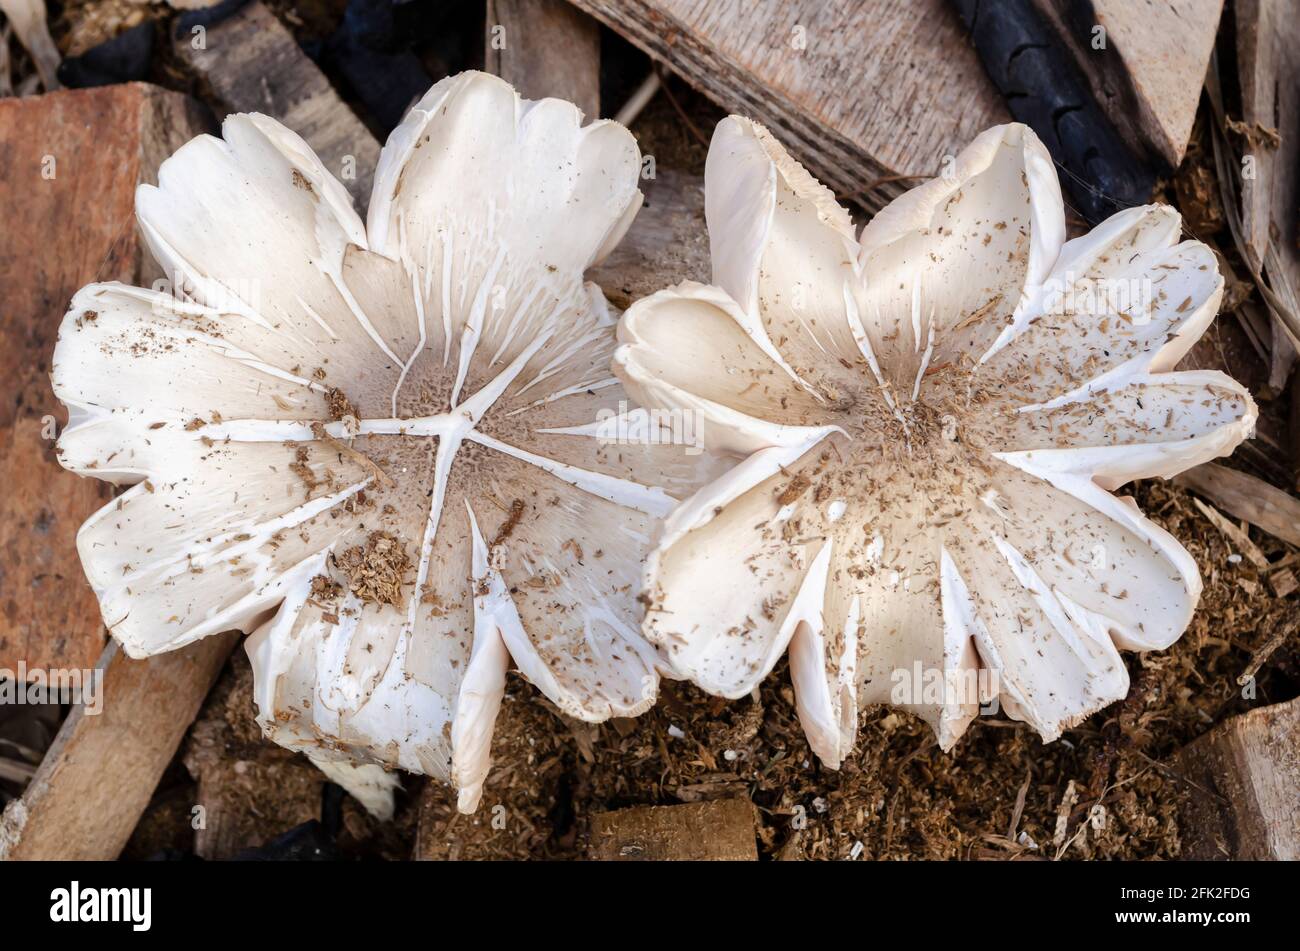 Top Of White Mushrooms Growing In Sawdust Stock Photo